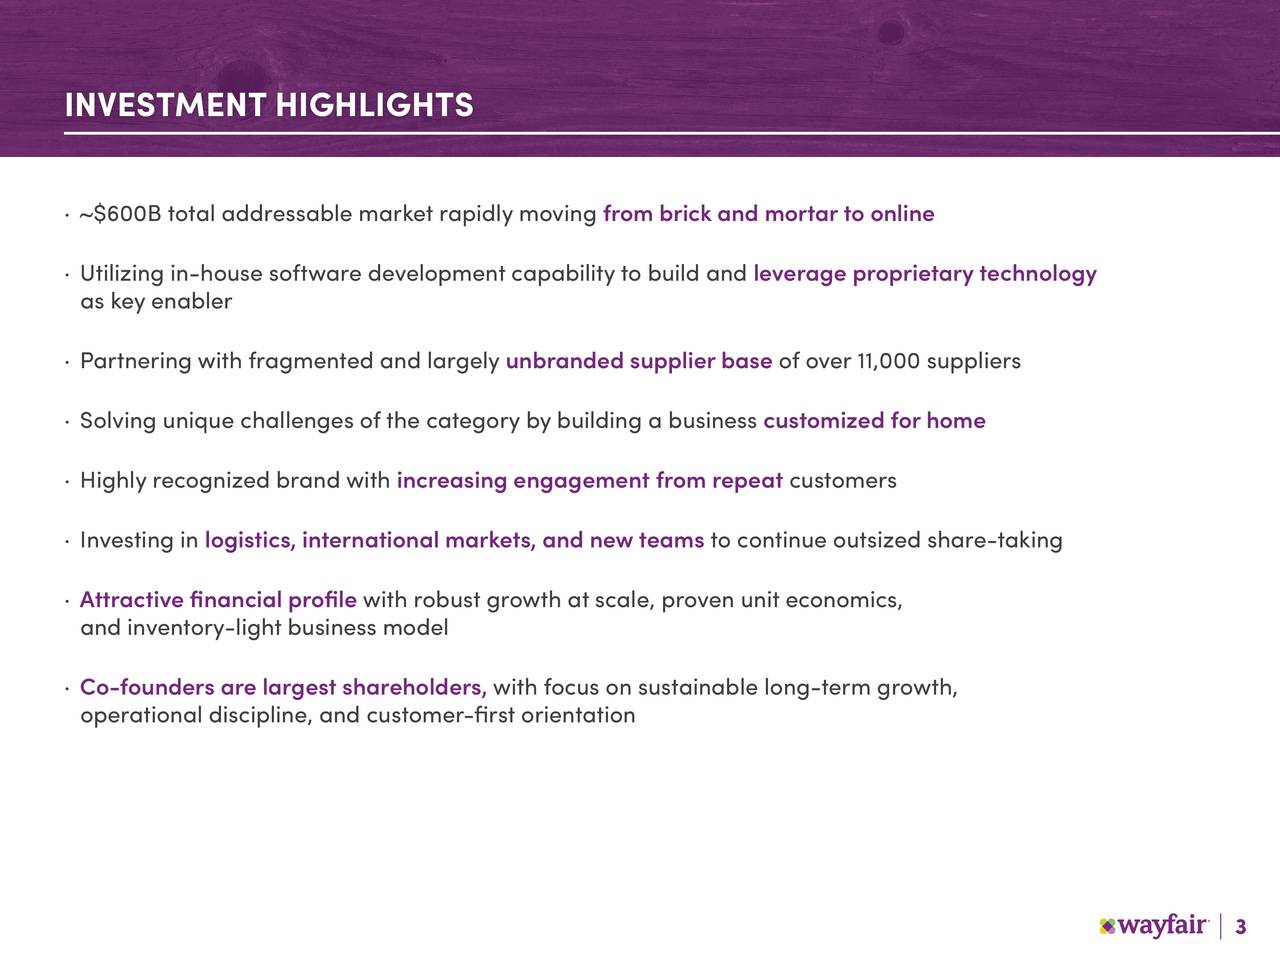 INVESTMENT HIGHLIGHTS